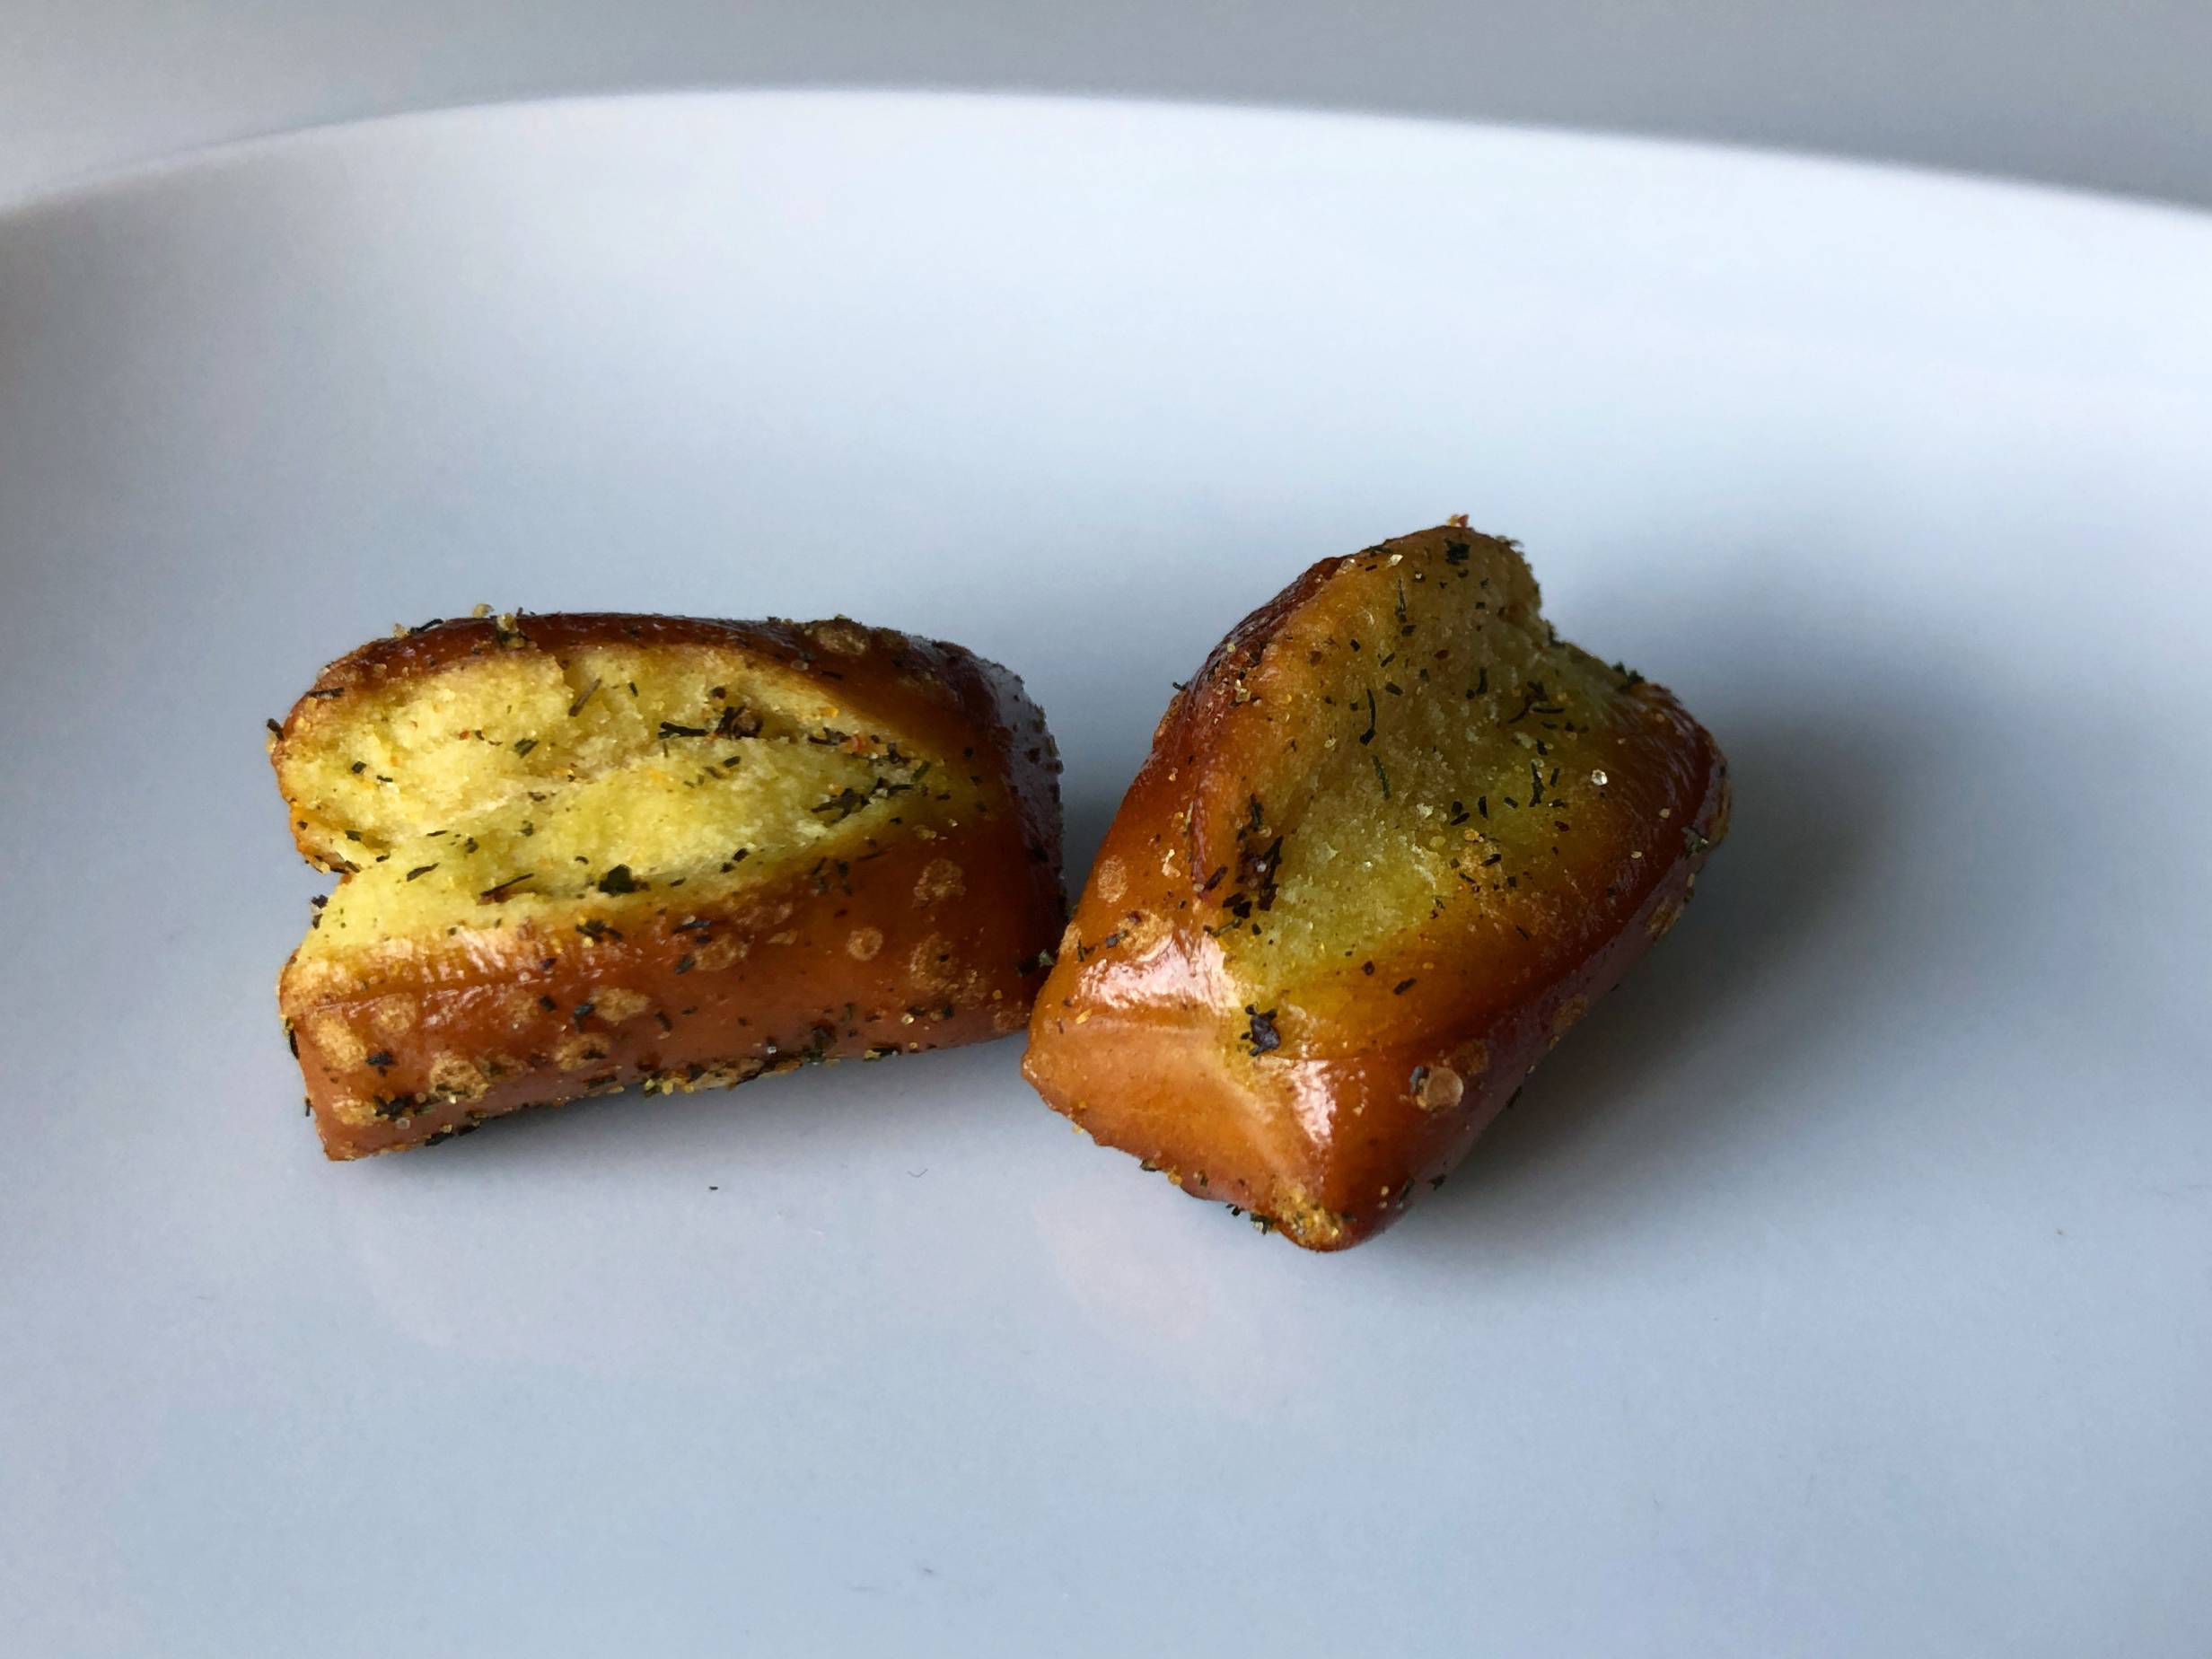 Two small cannabis-infused pretzel bites with bits of herbs and salt sit on a white plate. Photo by Alyssa Buckley.